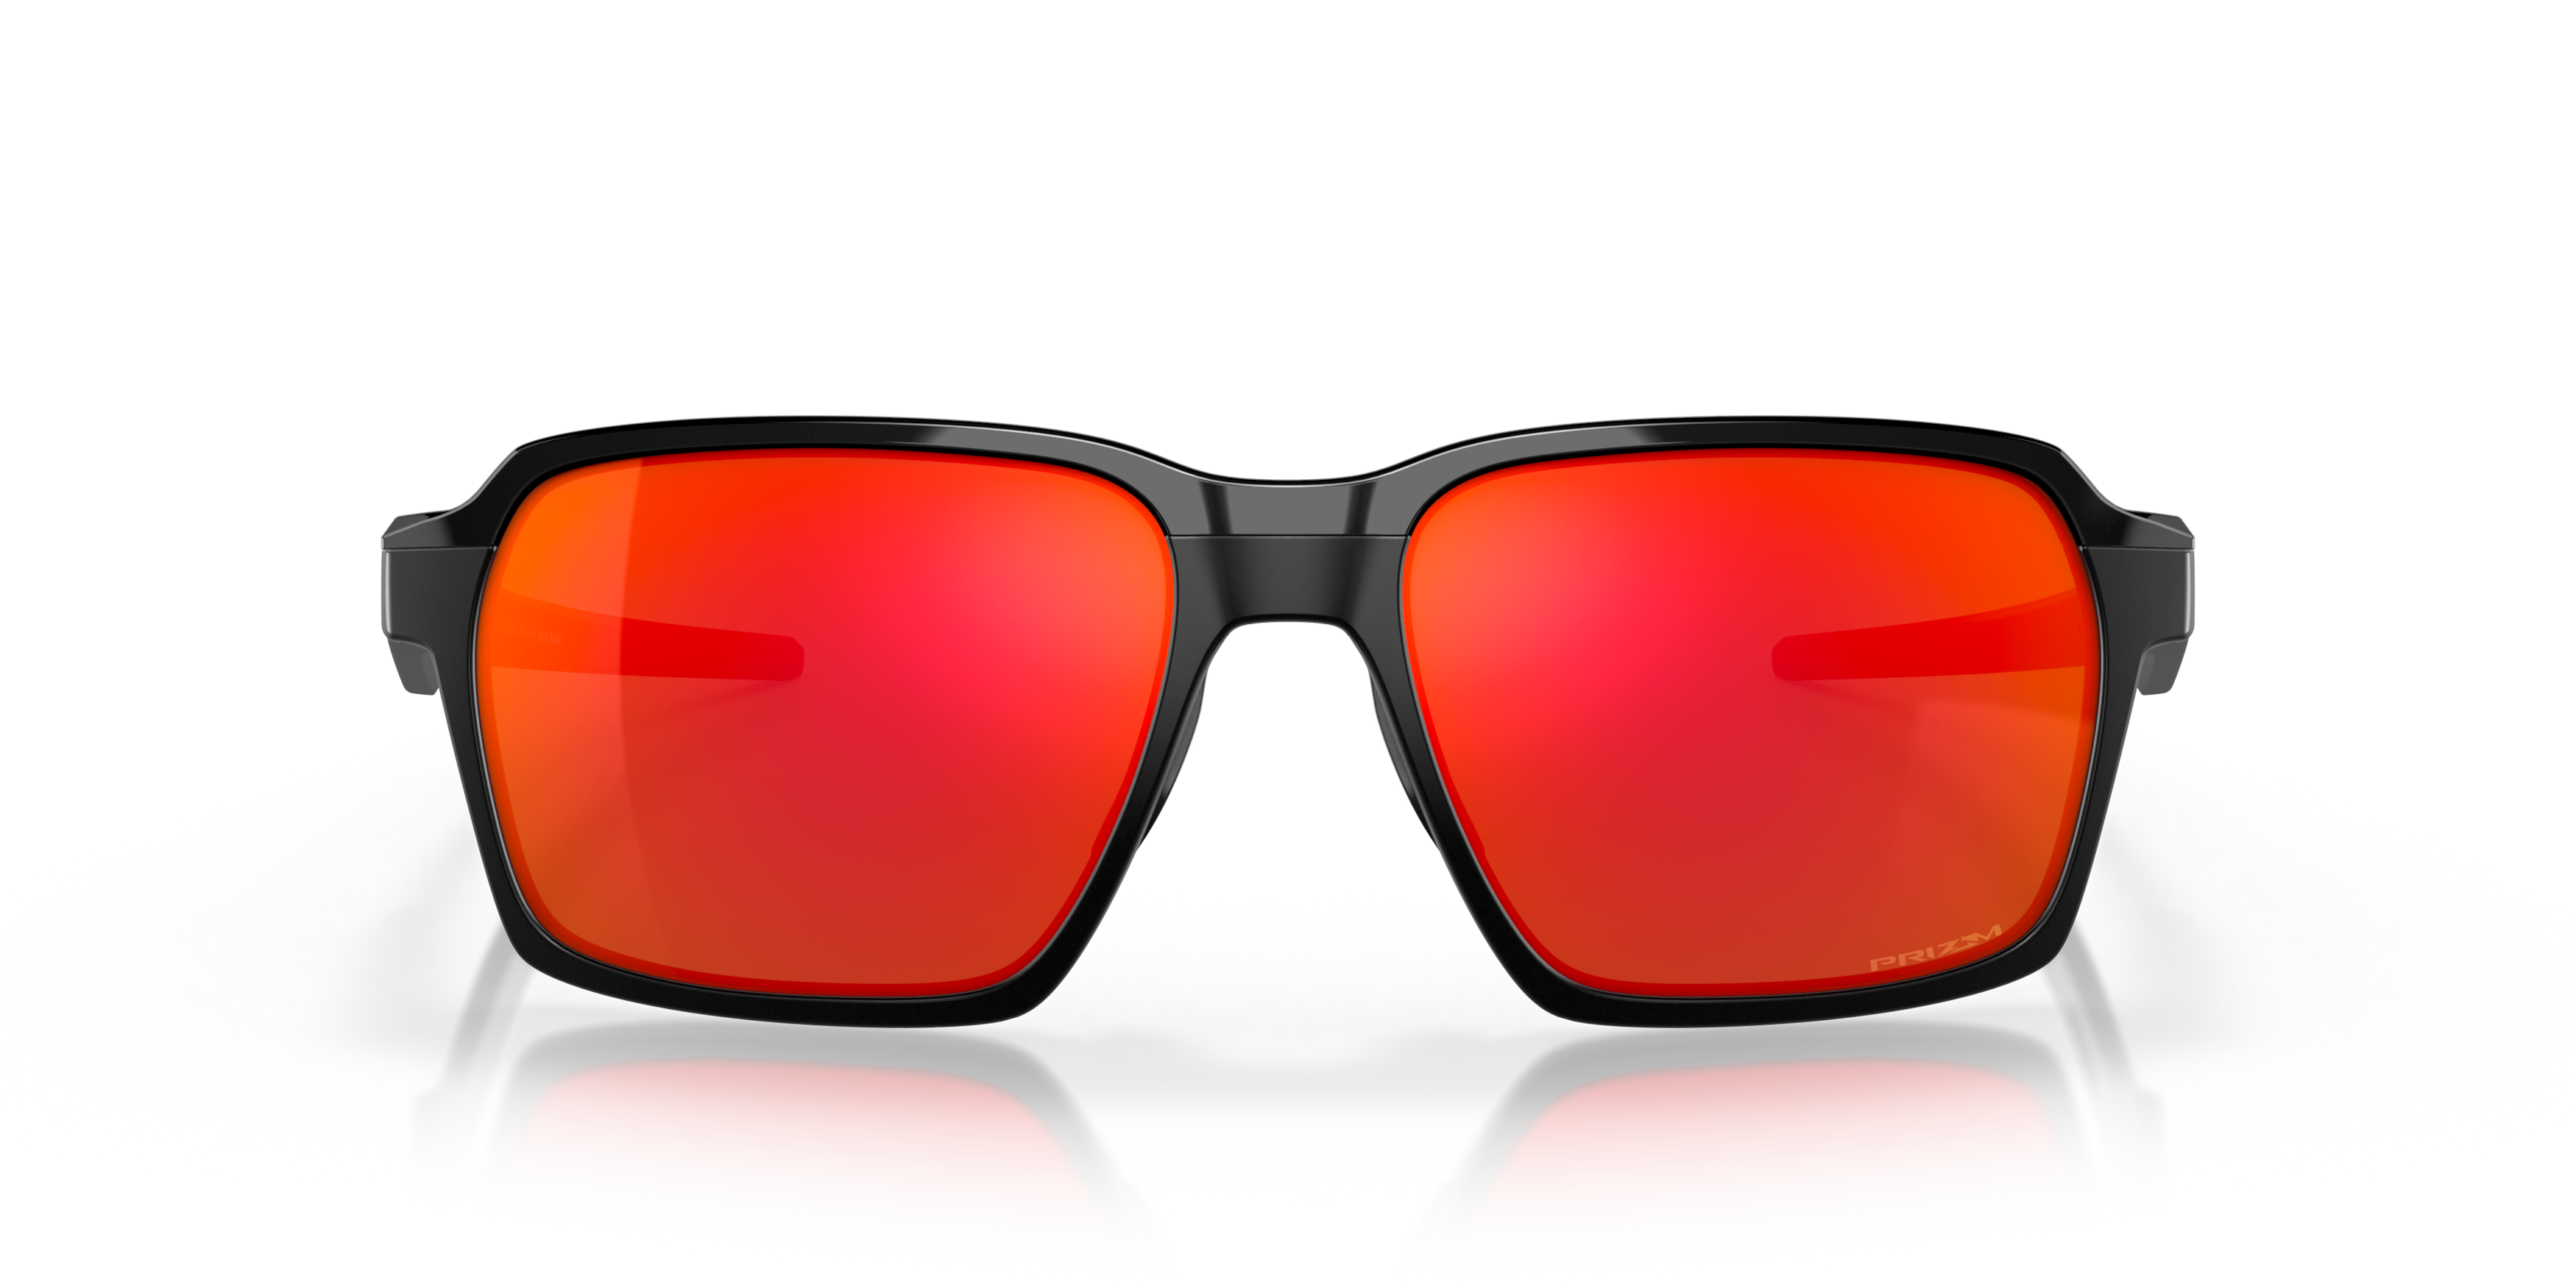 [products.image.front] Oakley OO4143 414303